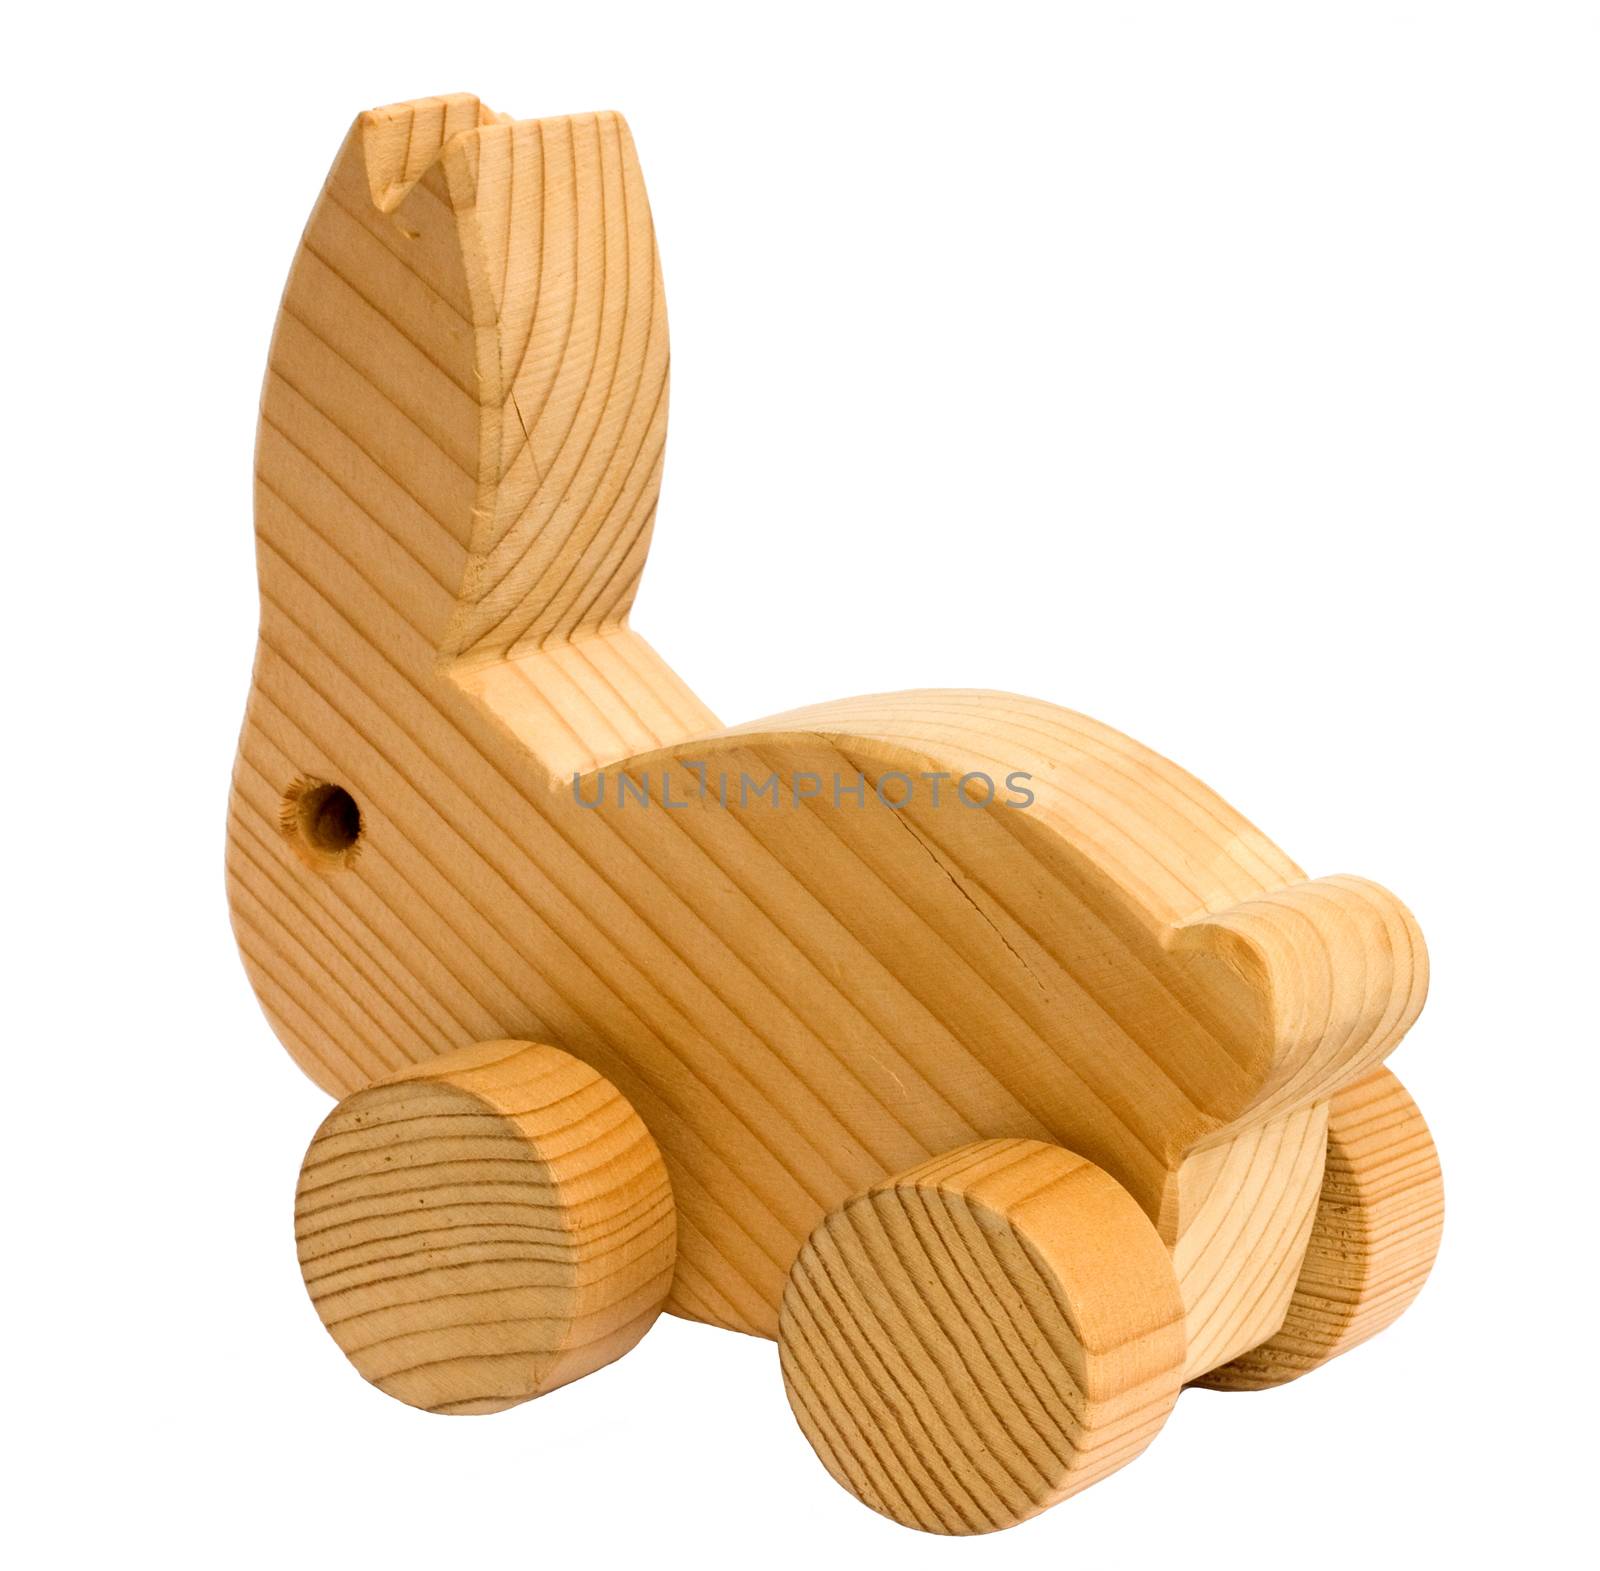 Old homemade wooden toy rabbit isolated on white